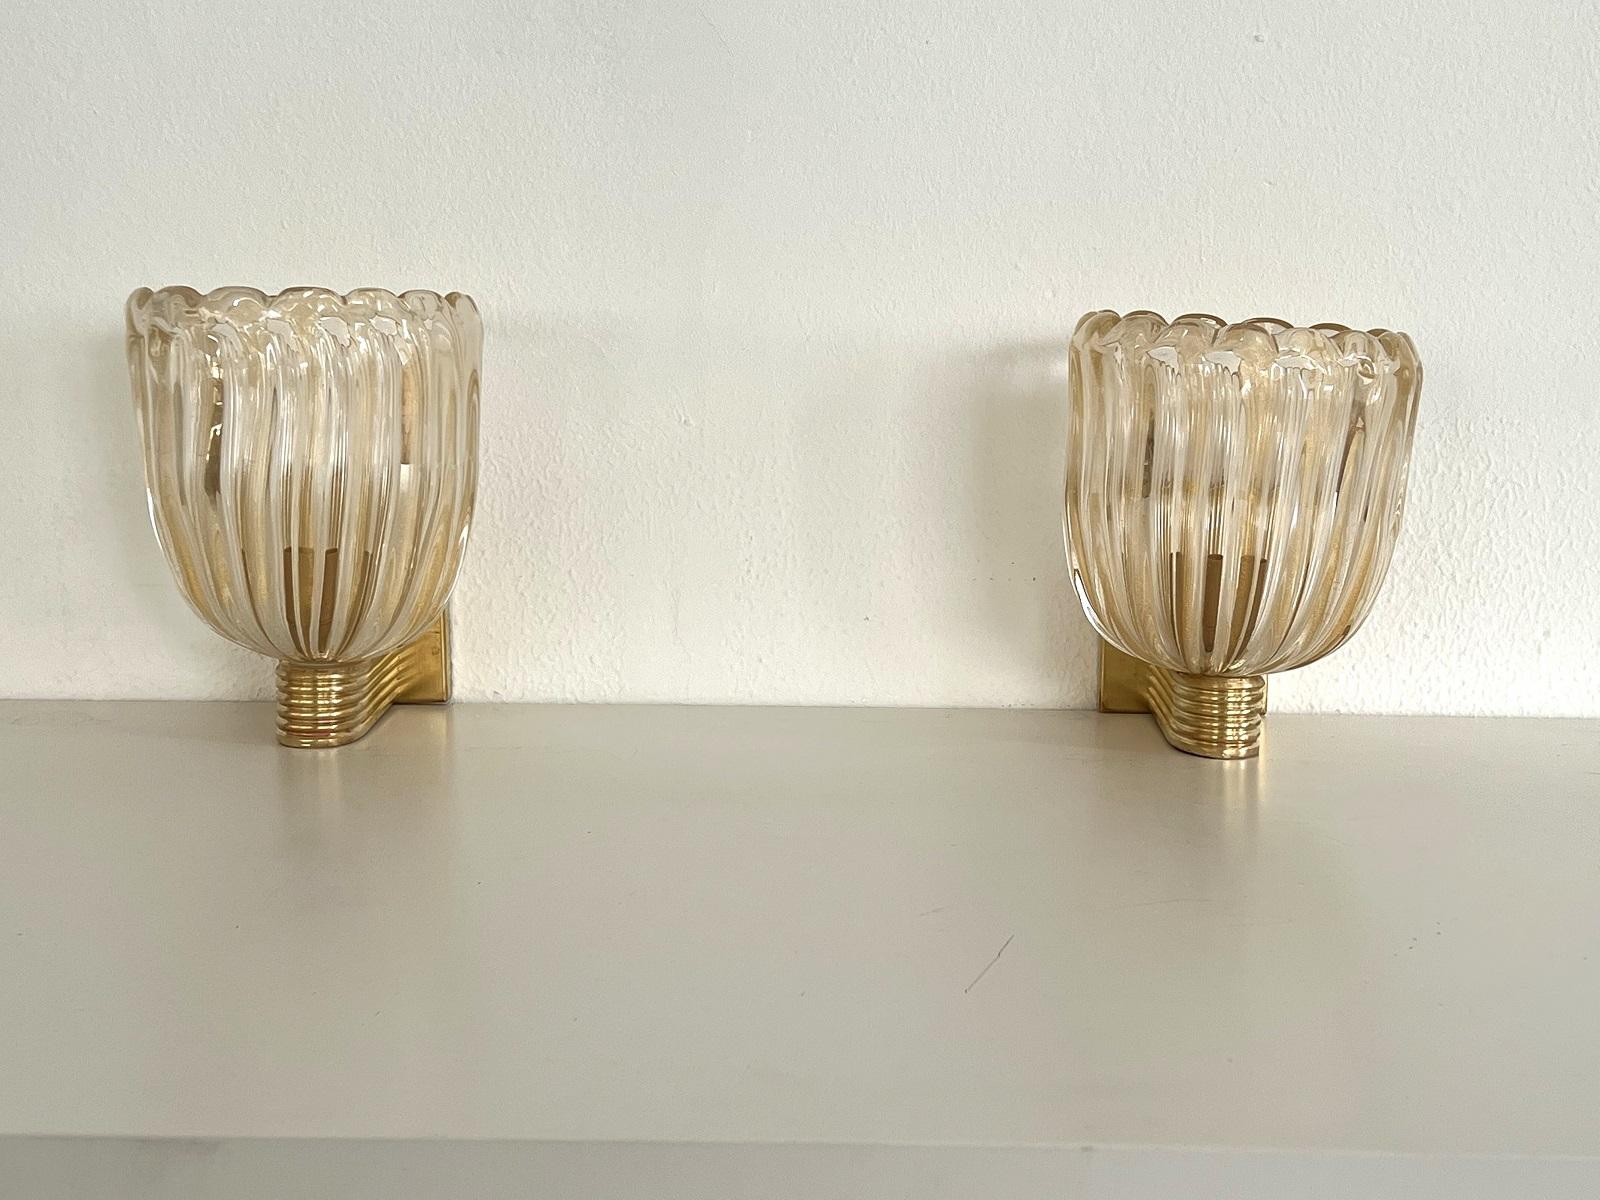 Italian Brass and Murano Glass Wall Lights or Sconces in Art Deco Style, 1990s For Sale 3